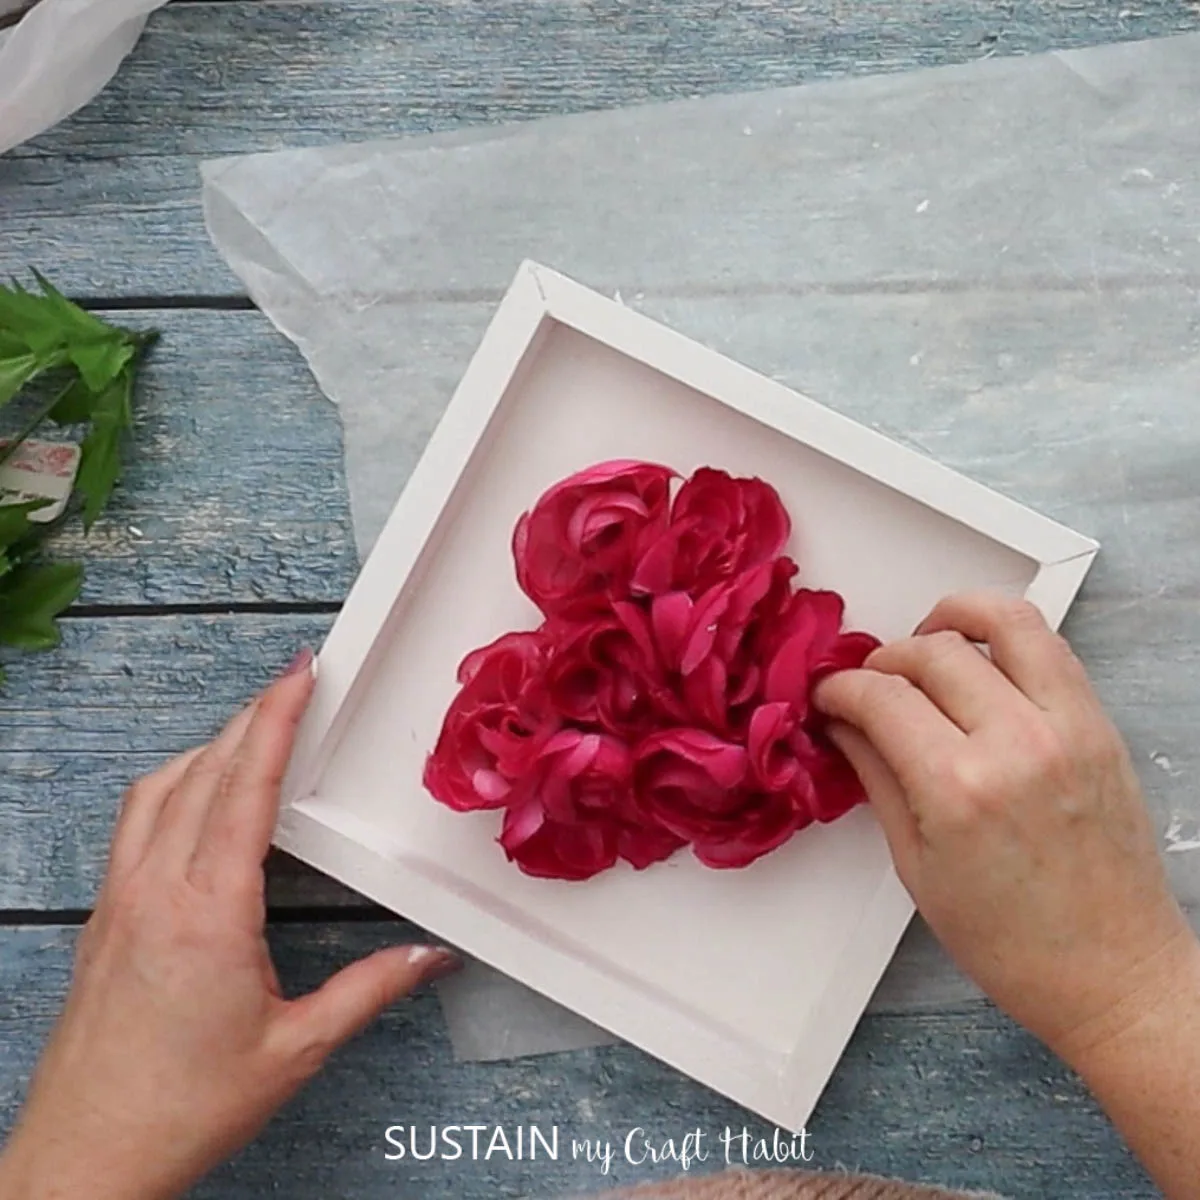 Gluing faux flowers to form a heart shape.